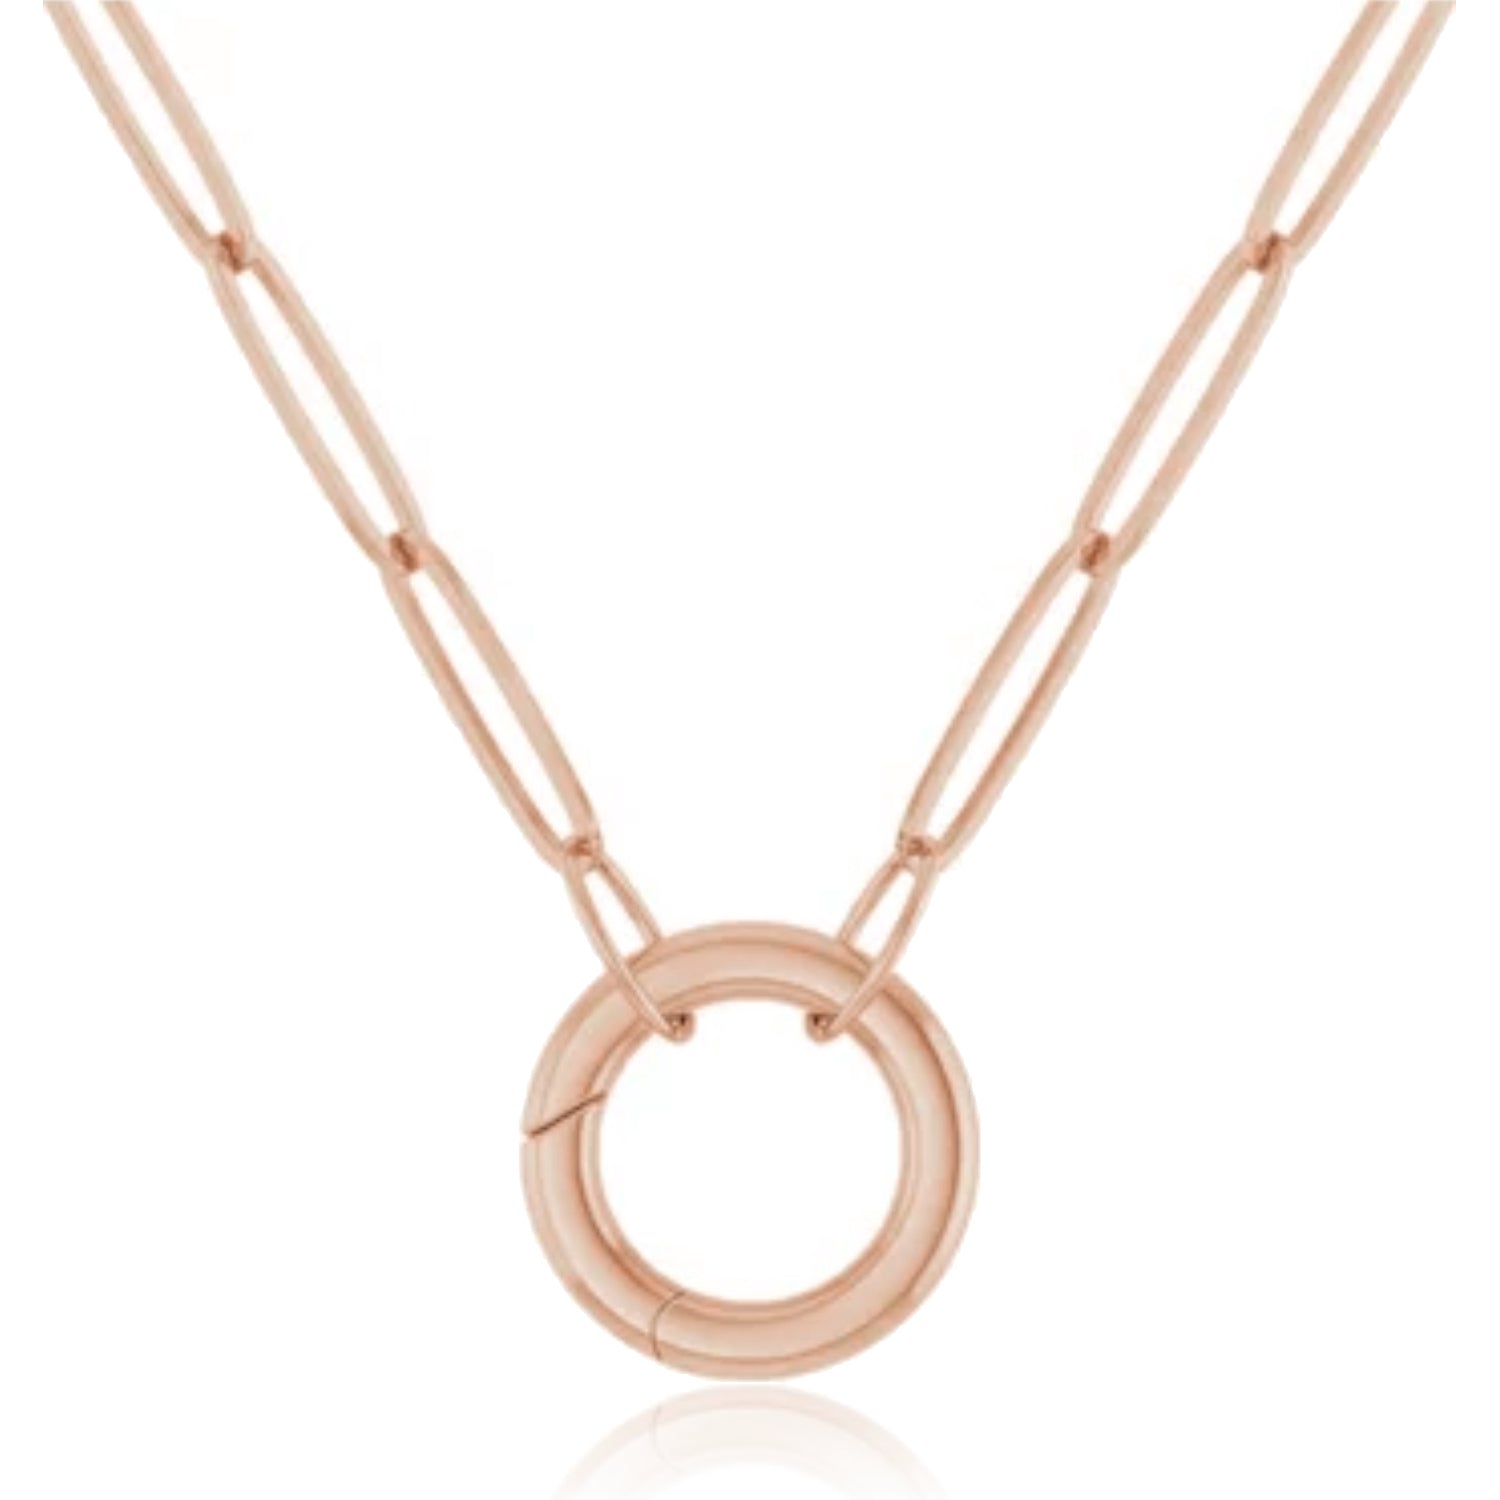 Enhancer Charm Paperclip Link Chain Necklace in Rose Gold